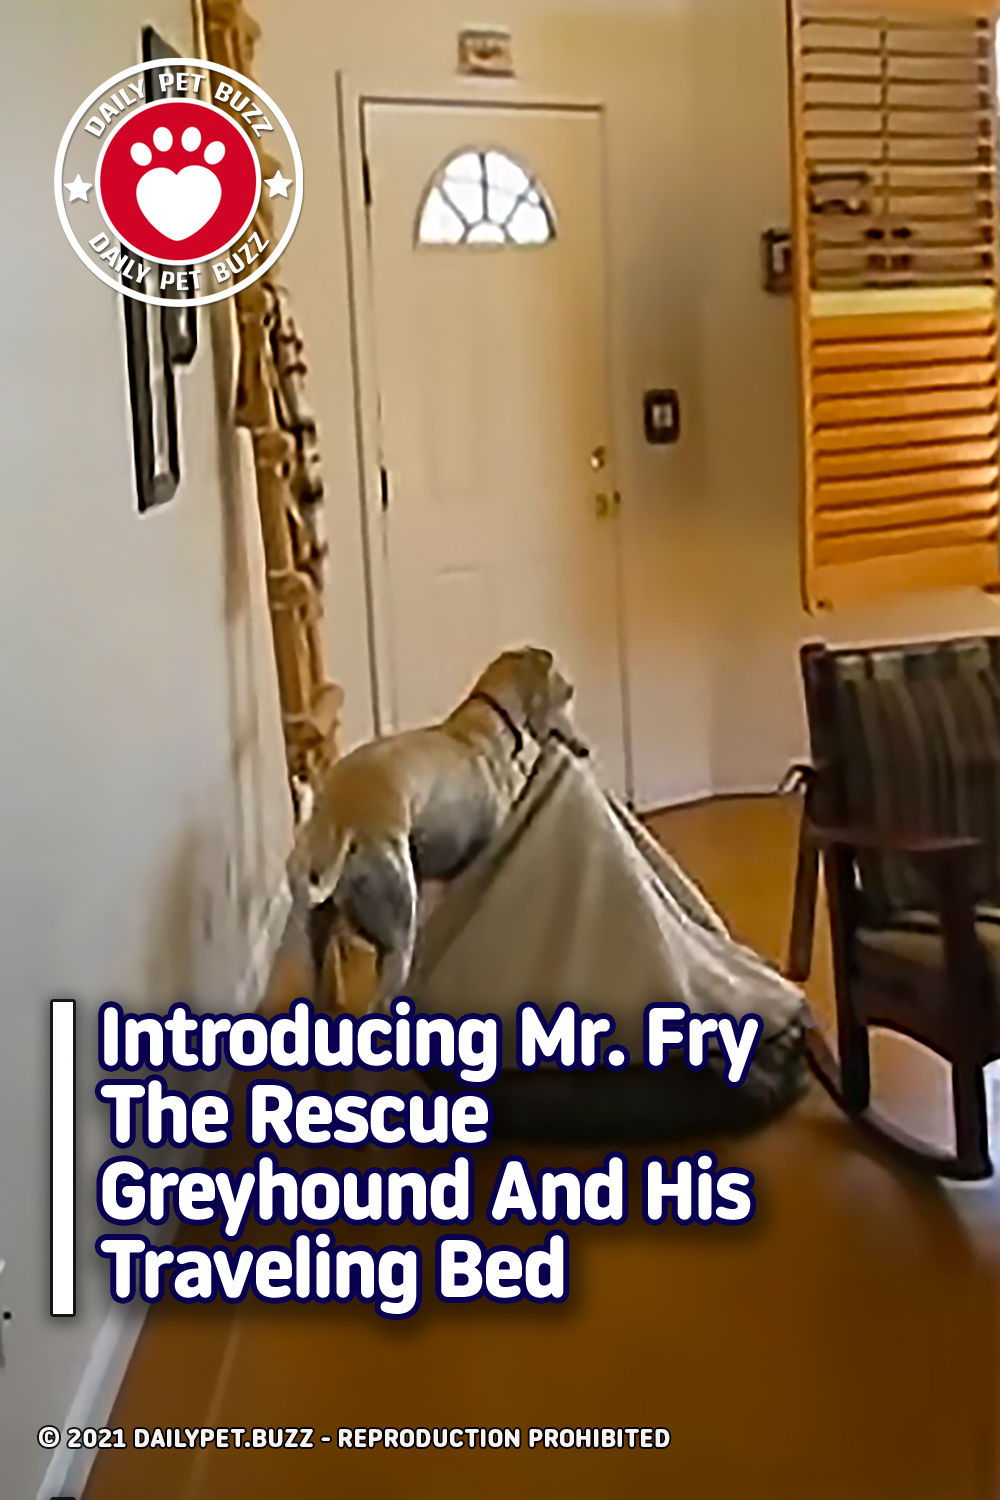 Introducing Mr. Fry The Rescue Greyhound And His Traveling Bed